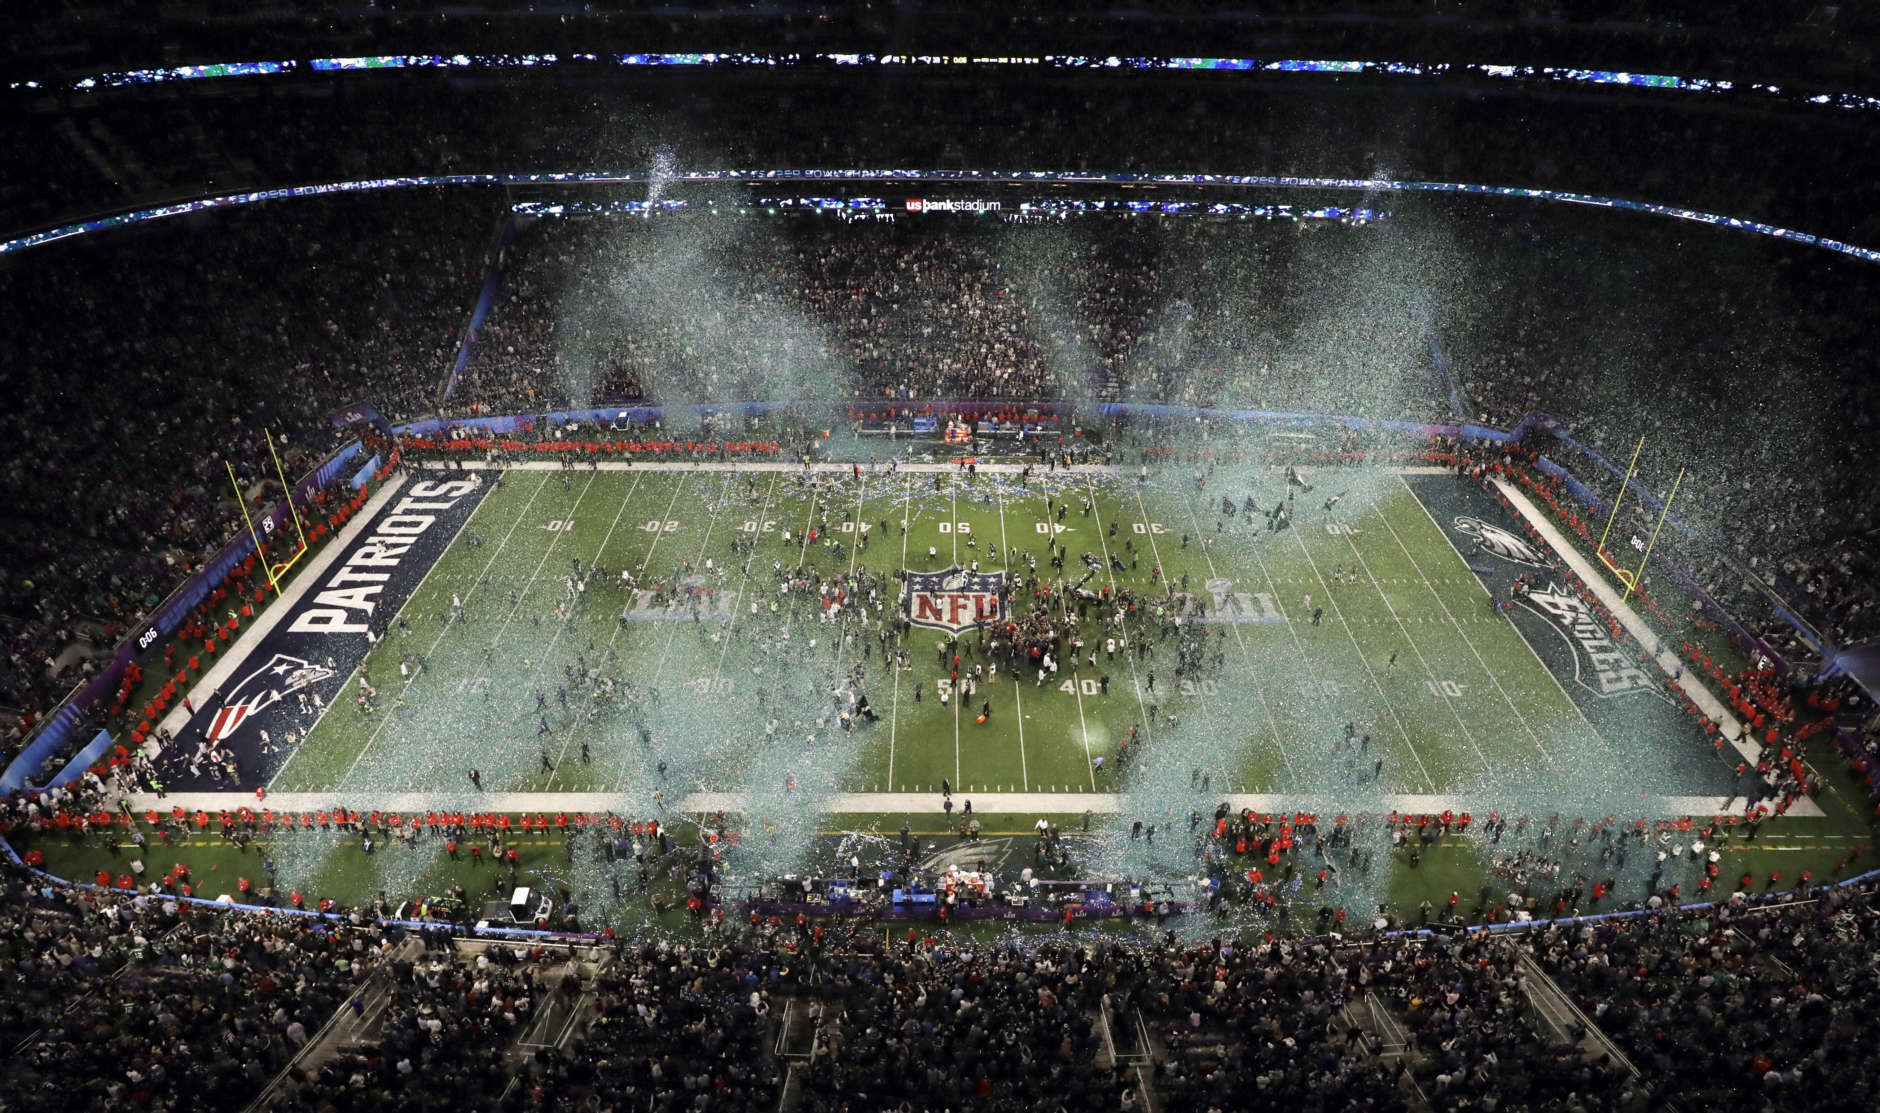 The Philadelphia Eagles celebrate after the NFL Super Bowl 52 football game against the New England Patriots, Sunday, Feb. 4, 2018, in Minneapolis. The Eagles won 41-33. (AP Photo/Morry Gash)